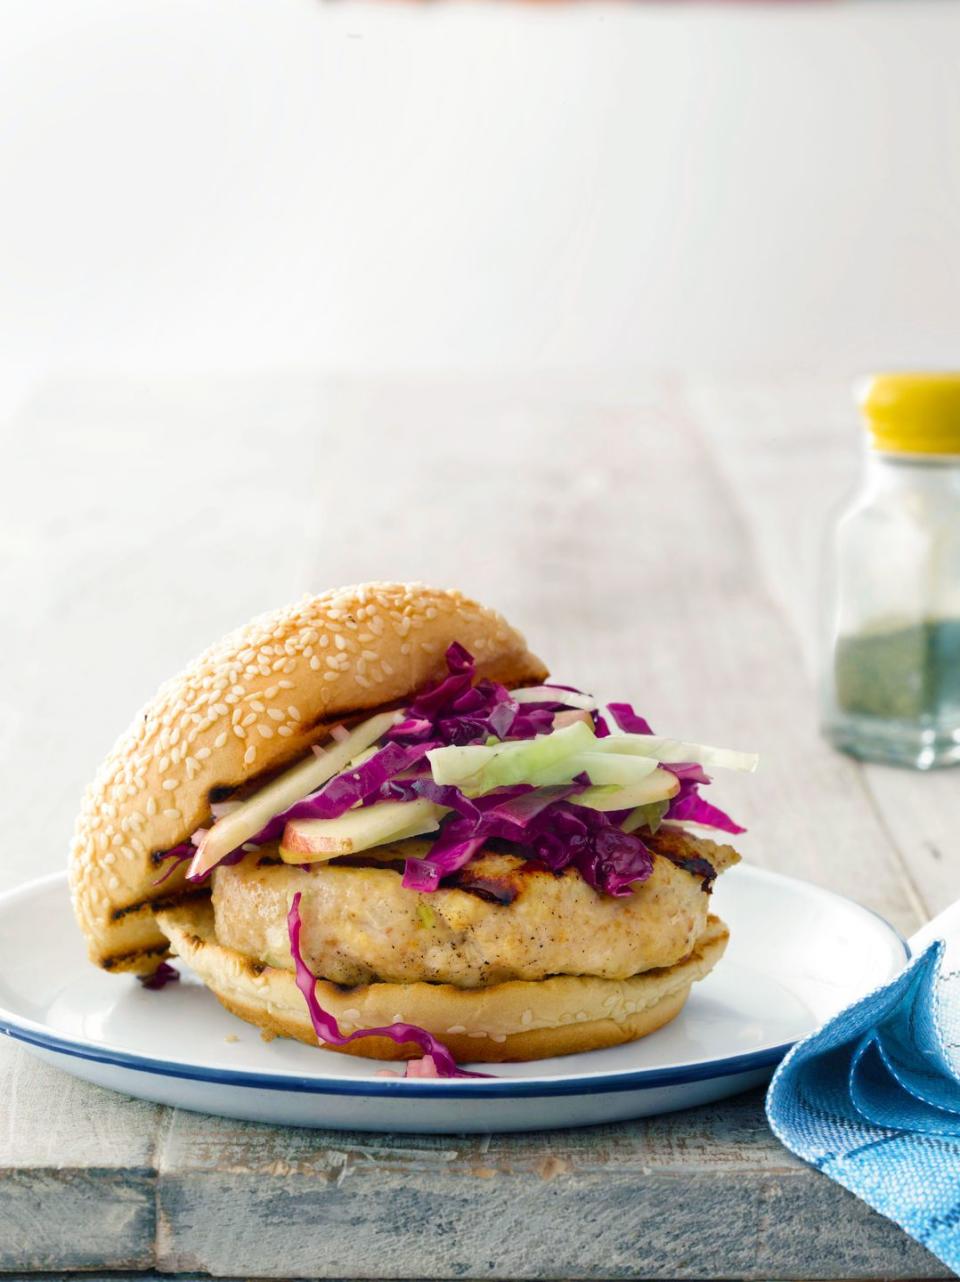 Miso-Glazed Chicken Burgers with Cabbage-Apple Slaw